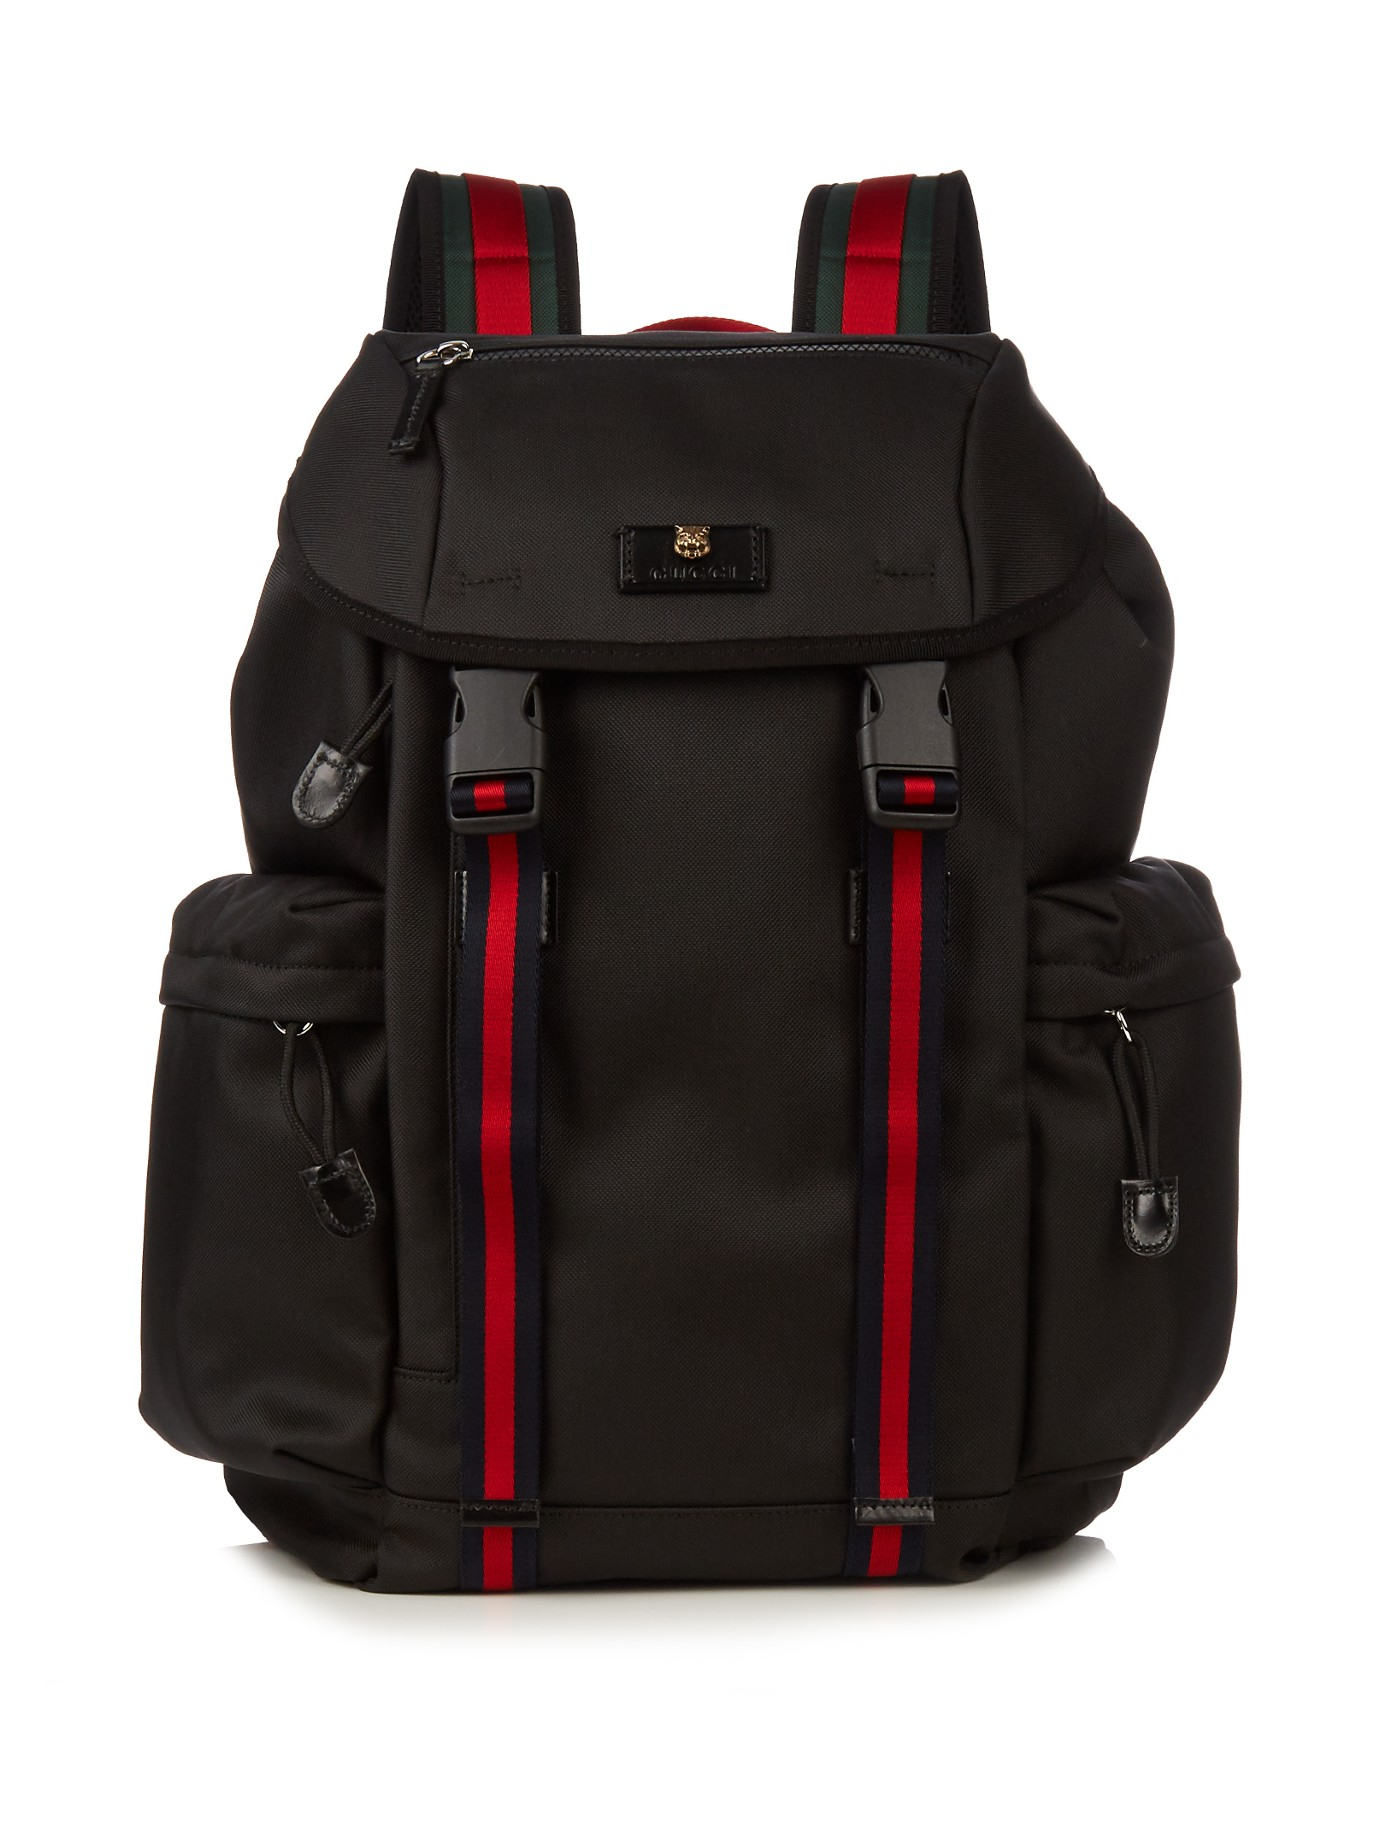 Lyst - Gucci Techno Canvas Backpack in Black for Men